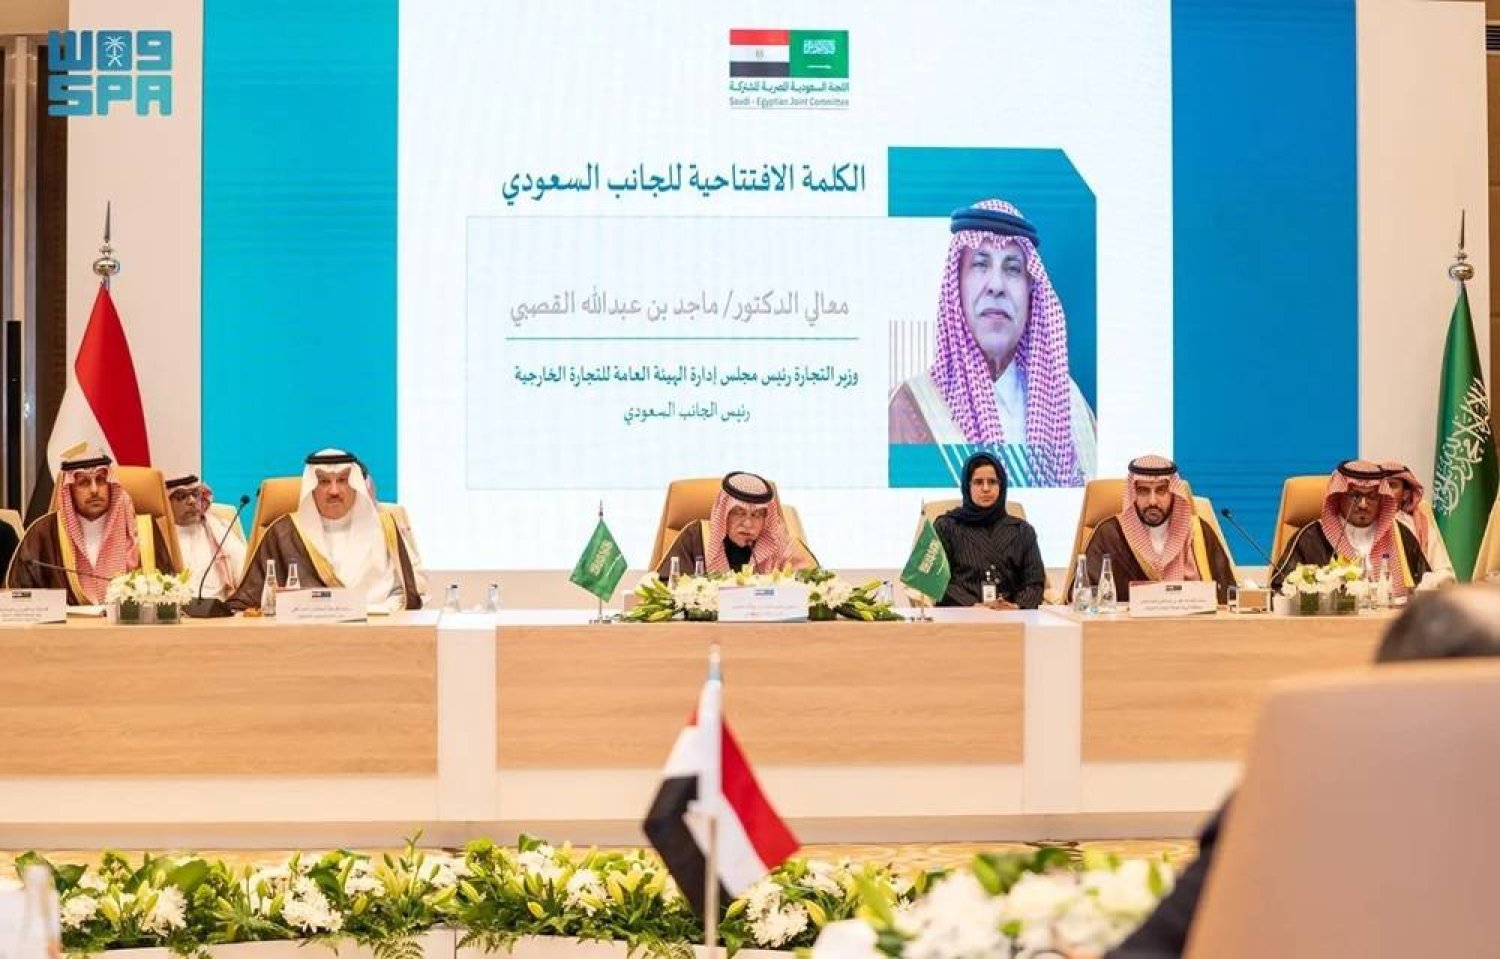 The meeting was chaired by Saudi Minister of Commerce and Chairman of the Board of Directors of the General Authority for Foreign Trade, Dr. Majid bin Abdullah Al-Qasabi, and Egyptian Minister of Industry and Trade Ahmed Samir. (SPA)